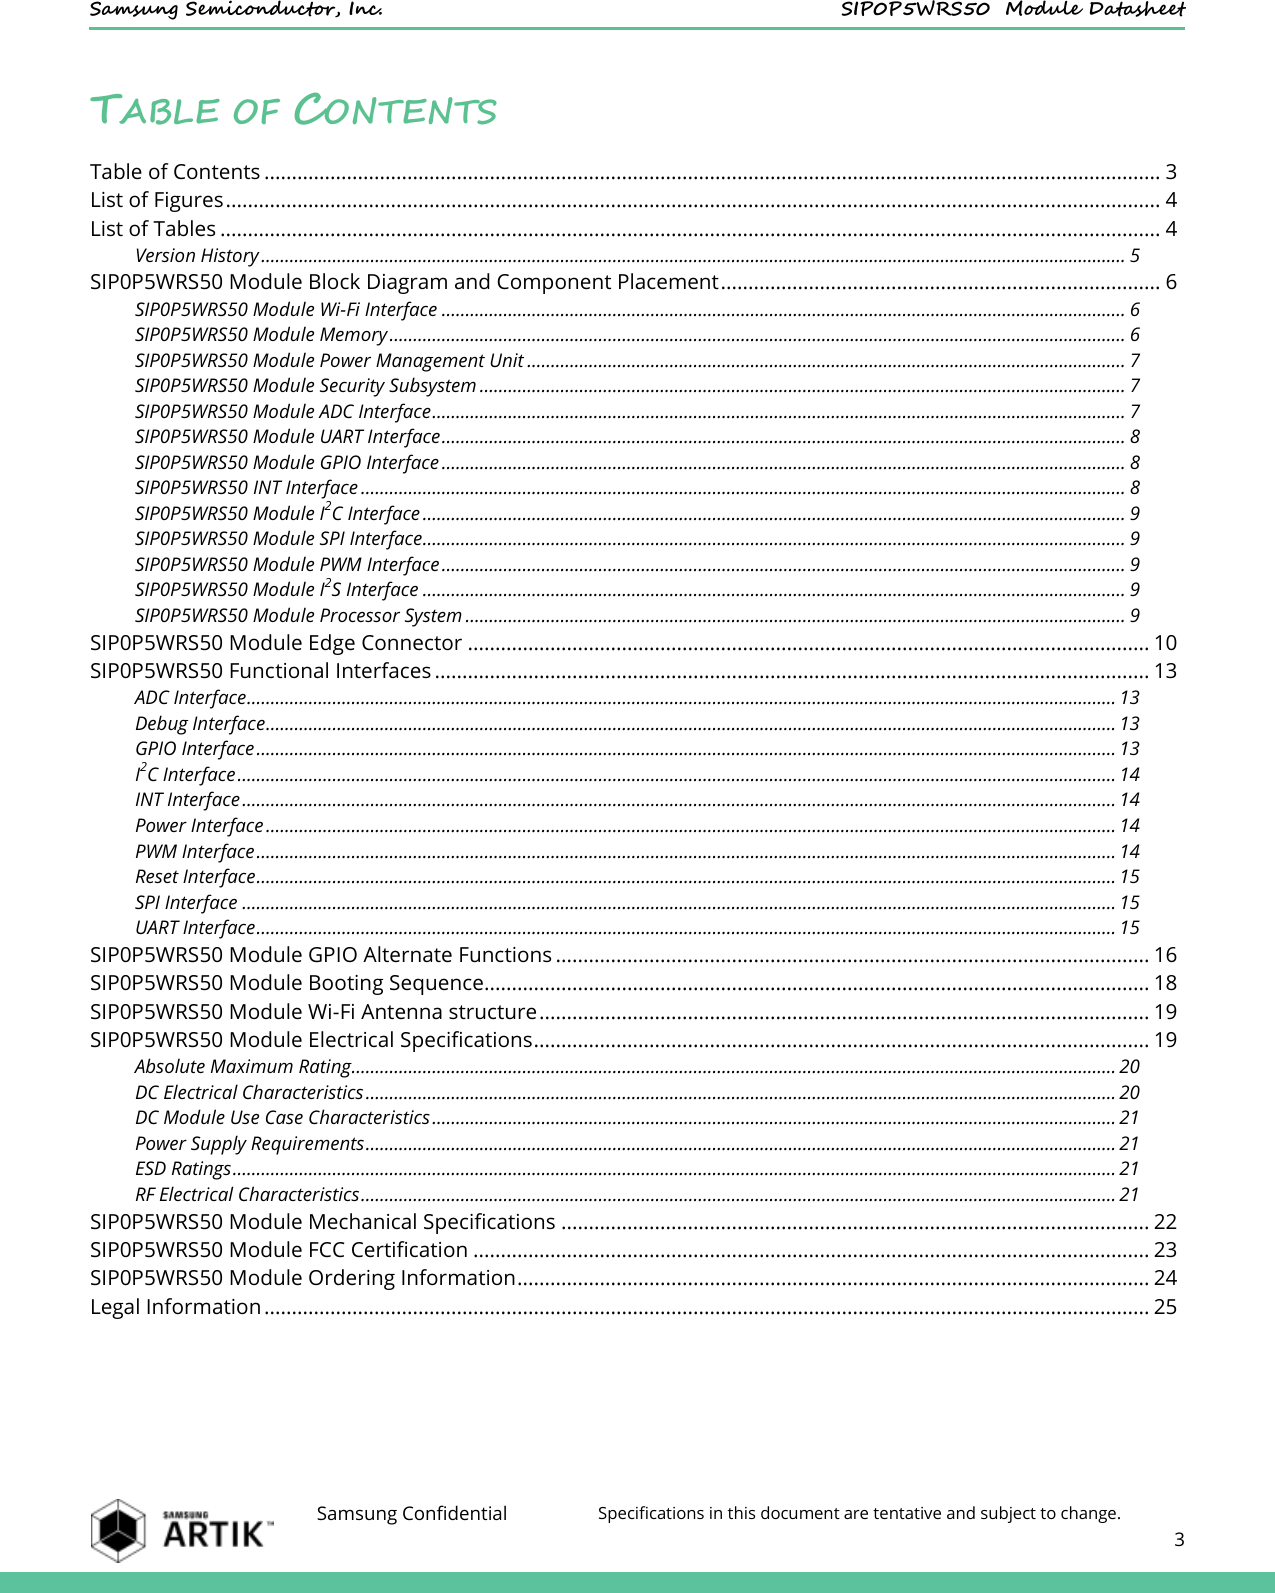    Samsung Semiconductor, Inc.  SIP0P5WRS50  Module Datasheet    Samsung Confidential Specifications in this document are tentative and subject to change.  3  TABLE OF CONTENTS Table of Contents ................................................................................................................................................................... 3 List of Figures .......................................................................................................................................................................... 4 List of Tables ........................................................................................................................................................................... 4 Version History ...................................................................................................................................................................................... 5 SIP0P5WRS50 Module Block Diagram and Component Placement ................................................................................ 6 SIP0P5WRS50 Module Wi-Fi Interface ................................................................................................................................................ 6 SIP0P5WRS50 Module Memory ........................................................................................................................................................... 6 SIP0P5WRS50 Module Power Management Unit .............................................................................................................................. 7 SIP0P5WRS50 Module Security Subsystem ........................................................................................................................................ 7 SIP0P5WRS50 Module ADC Interface .................................................................................................................................................. 7 SIP0P5WRS50 Module UART Interface ................................................................................................................................................ 8 SIP0P5WRS50 Module GPIO Interface ................................................................................................................................................ 8 SIP0P5WRS50 INT Interface ................................................................................................................................................................. 8 SIP0P5WRS50 Module I2C Interface .................................................................................................................................................... 9 SIP0P5WRS50 Module SPI Interface.................................................................................................................................................... 9 SIP0P5WRS50 Module PWM Interface ................................................................................................................................................ 9 SIP0P5WRS50 Module I2S Interface .................................................................................................................................................... 9 SIP0P5WRS50 Module Processor System ........................................................................................................................................... 9 SIP0P5WRS50 Module Edge Connector ............................................................................................................................ 10 SIP0P5WRS50 Functional Interfaces .................................................................................................................................. 13 ADC Interface ....................................................................................................................................................................................... 13 Debug Interface ................................................................................................................................................................................... 13 GPIO Interface ..................................................................................................................................................................................... 13 I2C Interface ......................................................................................................................................................................................... 14 INT Interface ........................................................................................................................................................................................ 14 Power Interface ................................................................................................................................................................................... 14 PWM Interface ..................................................................................................................................................................................... 14 Reset Interface ..................................................................................................................................................................................... 15 SPI Interface ........................................................................................................................................................................................ 15 UART Interface ..................................................................................................................................................................................... 15 SIP0P5WRS50 Module GPIO Alternate Functions ............................................................................................................ 16 SIP0P5WRS50 Module Booting Sequence......................................................................................................................... 18 SIP0P5WRS50 Module Wi-Fi Antenna structure ............................................................................................................... 19 SIP0P5WRS50 Module Electrical Specifications ................................................................................................................ 19 Absolute Maximum Rating ................................................................................................................................................................. 20 DC Electrical Characteristics .............................................................................................................................................................. 20 DC Module Use Case Characteristics ................................................................................................................................................ 21 Power Supply Requirements .............................................................................................................................................................. 21 ESD Ratings .......................................................................................................................................................................................... 21 RF Electrical Characteristics ............................................................................................................................................................... 21 SIP0P5WRS50 Module Mechanical Specifications ........................................................................................................... 22 SIP0P5WRS50 Module FCC Certification ........................................................................................................................... 23 SIP0P5WRS50 Module Ordering Information ................................................................................................................... 24 Legal Information ................................................................................................................................................................. 25  